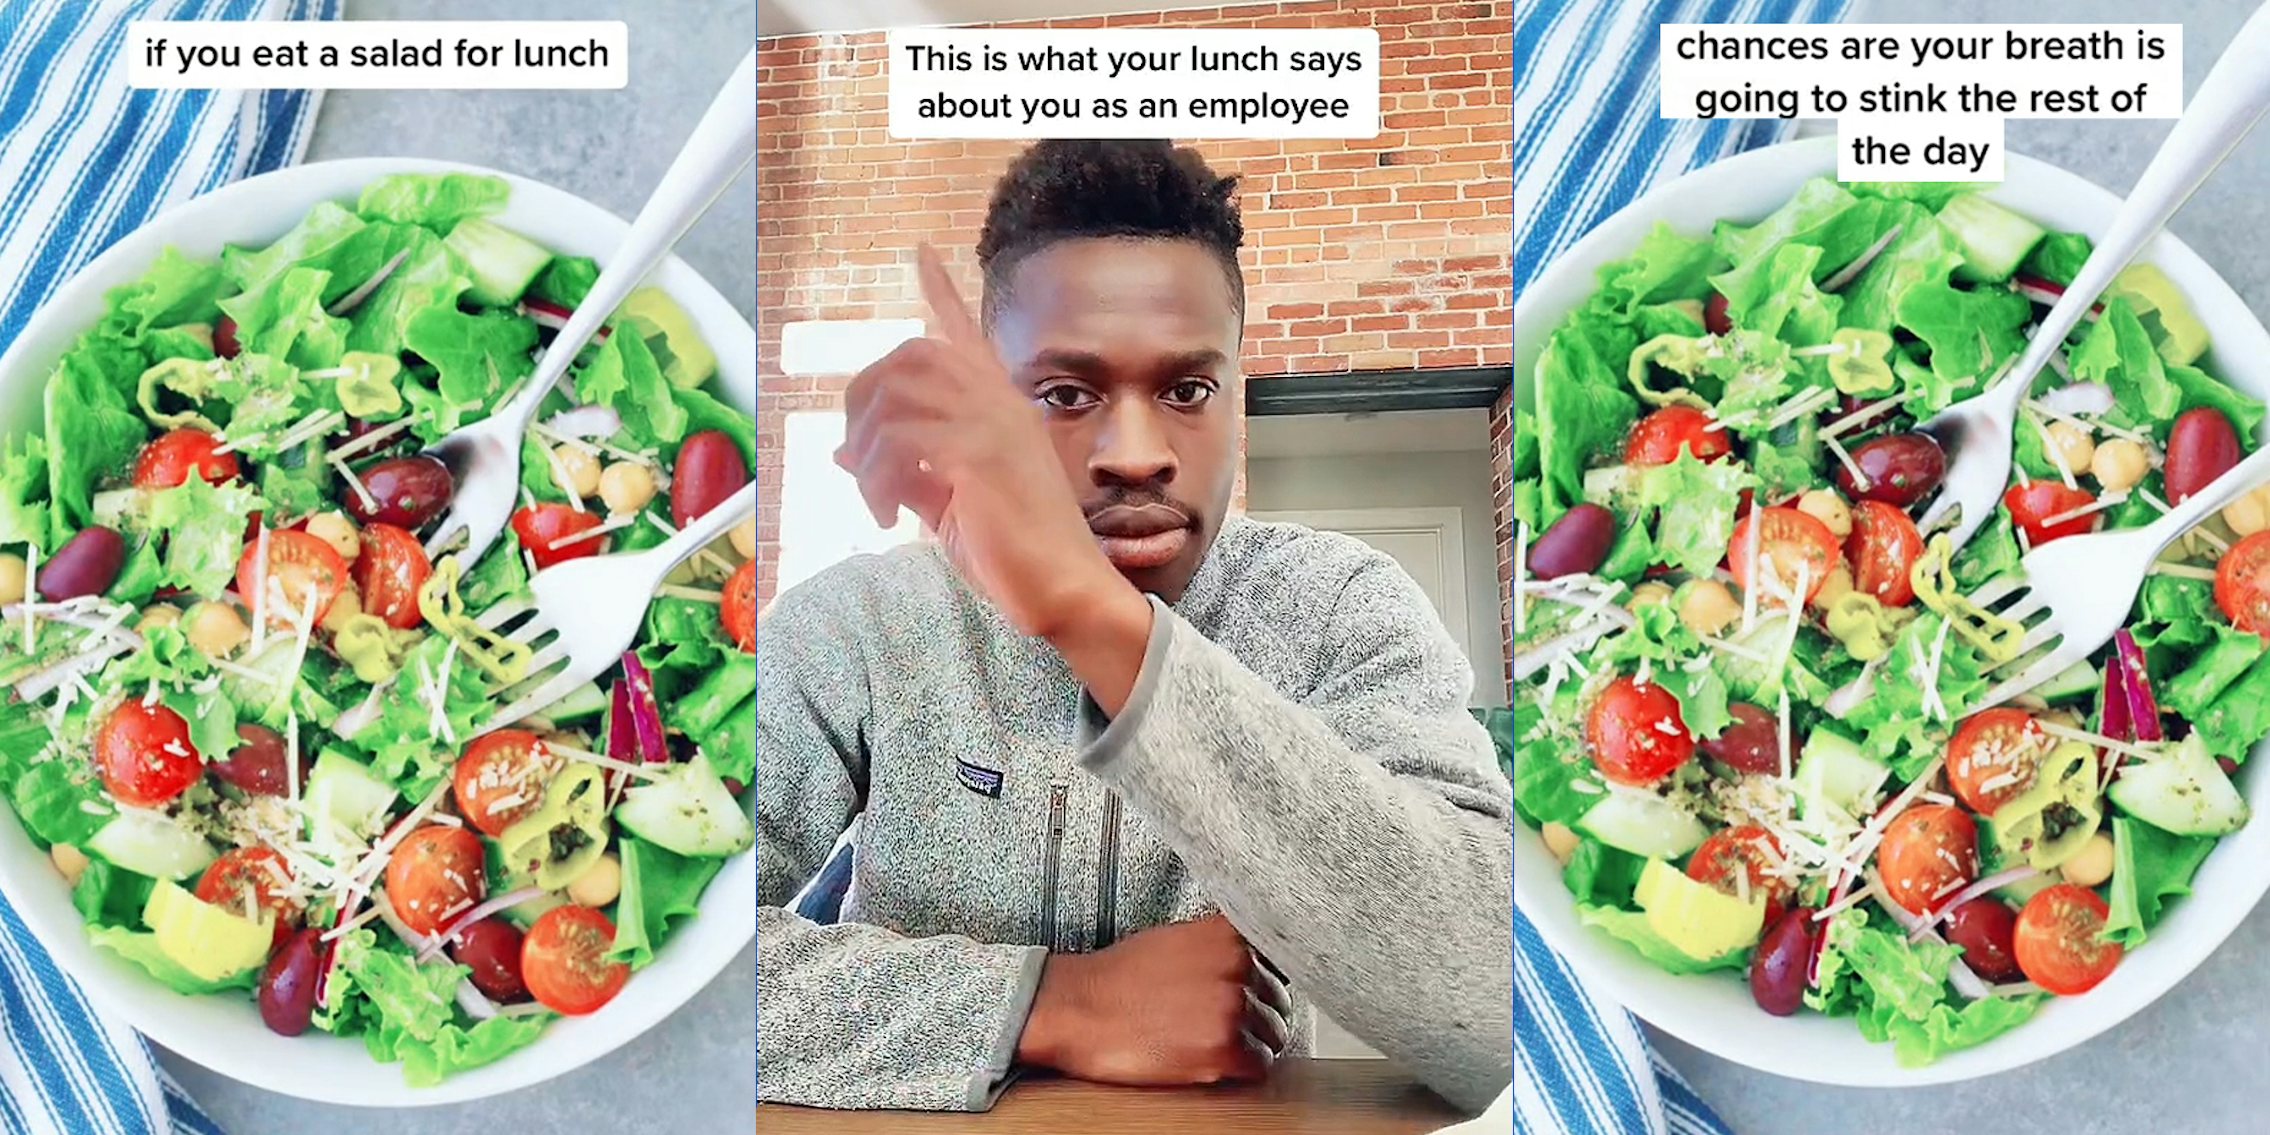 salad with caption 'if you eat a salad for lunch' (l) Man sitting at table pointing to caption 'This is what your lunch says about you as an employee' (c) salad with caption 'chances are your breath is going to stink the rest of the day' (r)